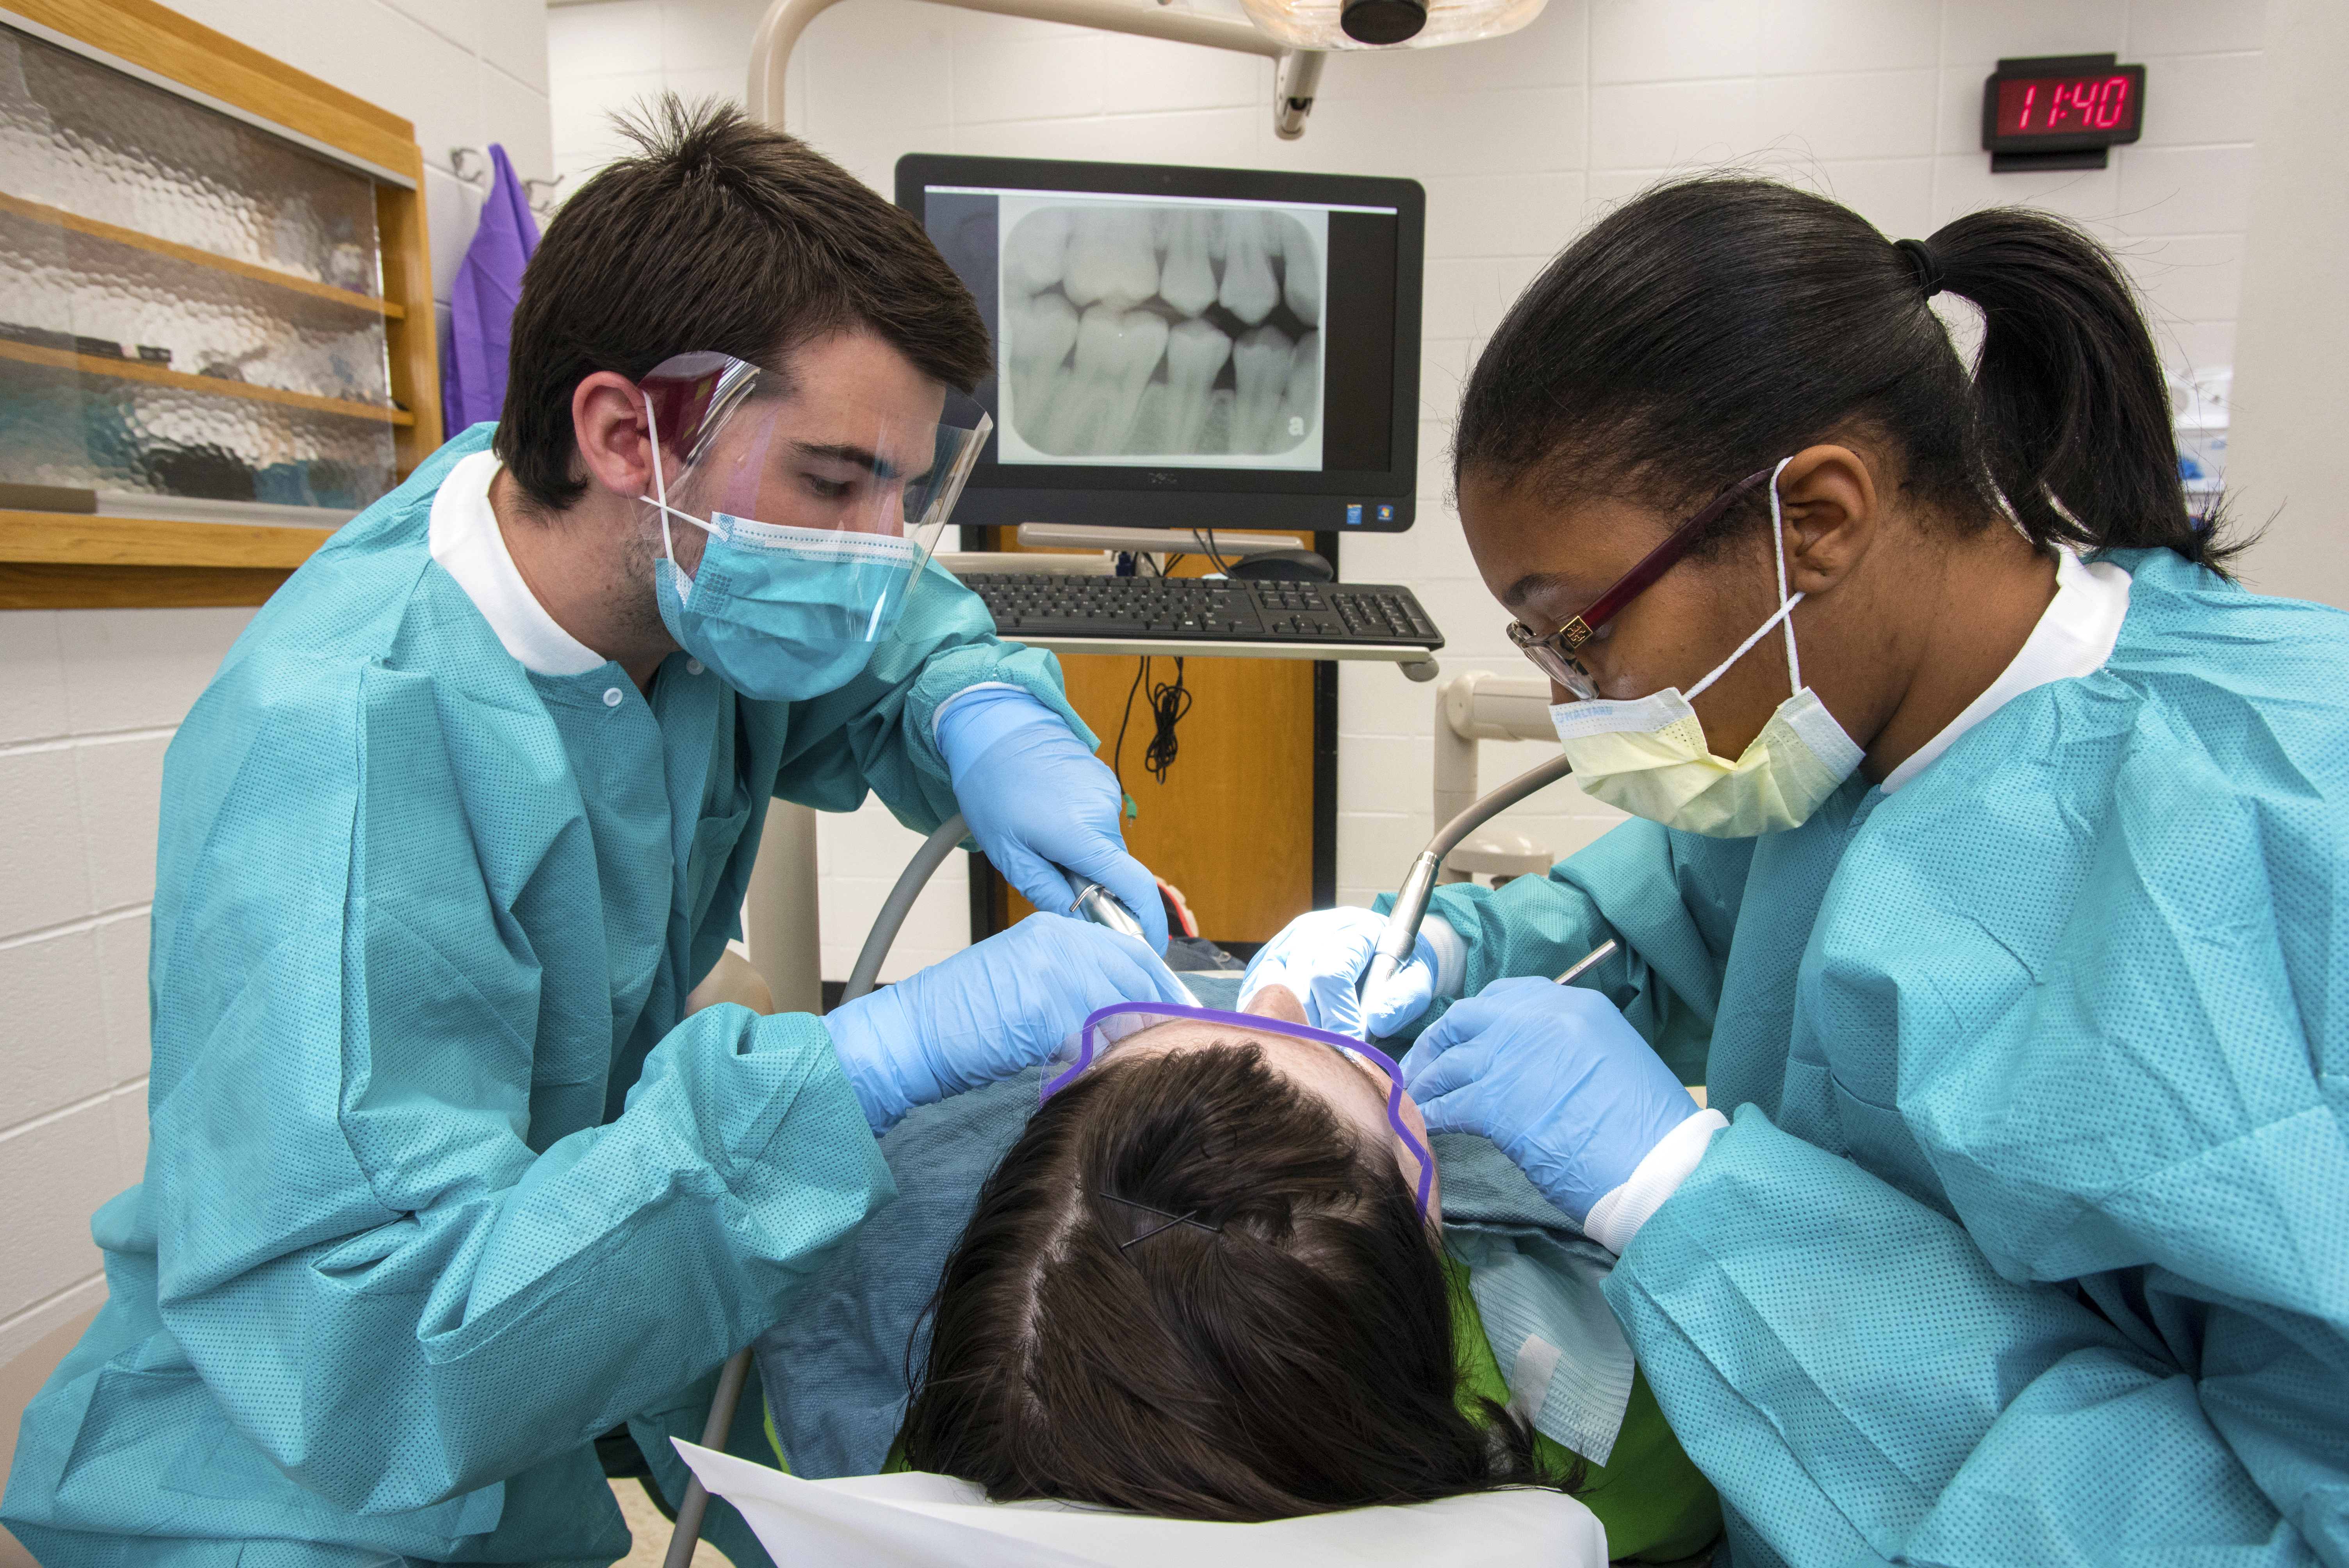 Dental Mission Week participants care for state’s underserved